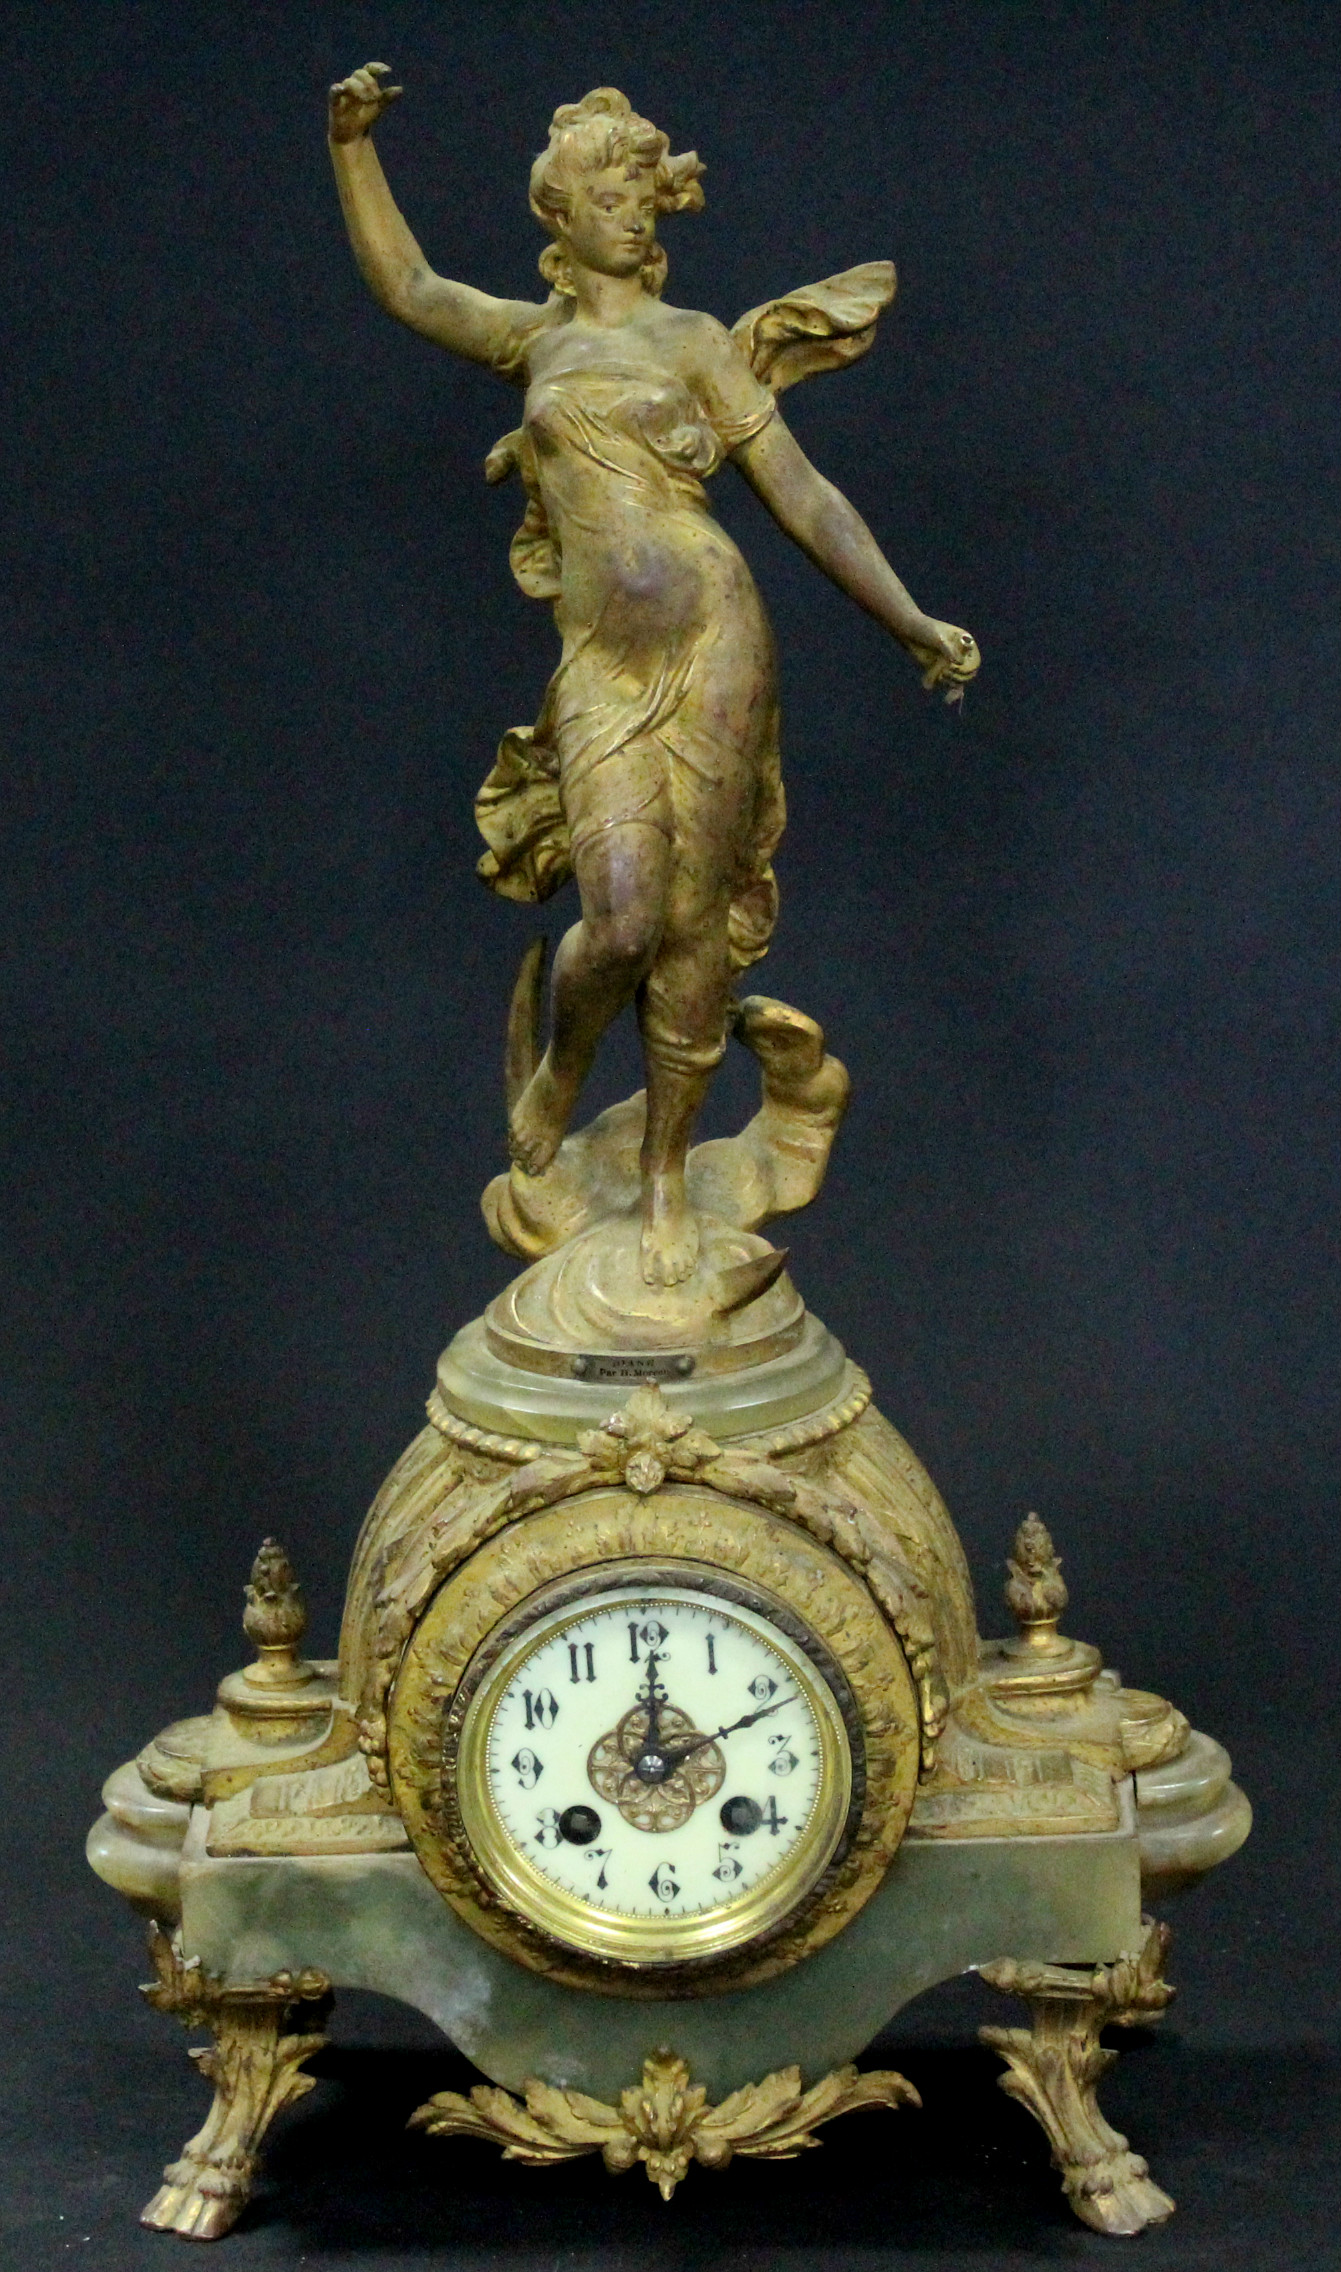 A 19th century French mantel clock in gilt speltre & onyx case with classical female figure above